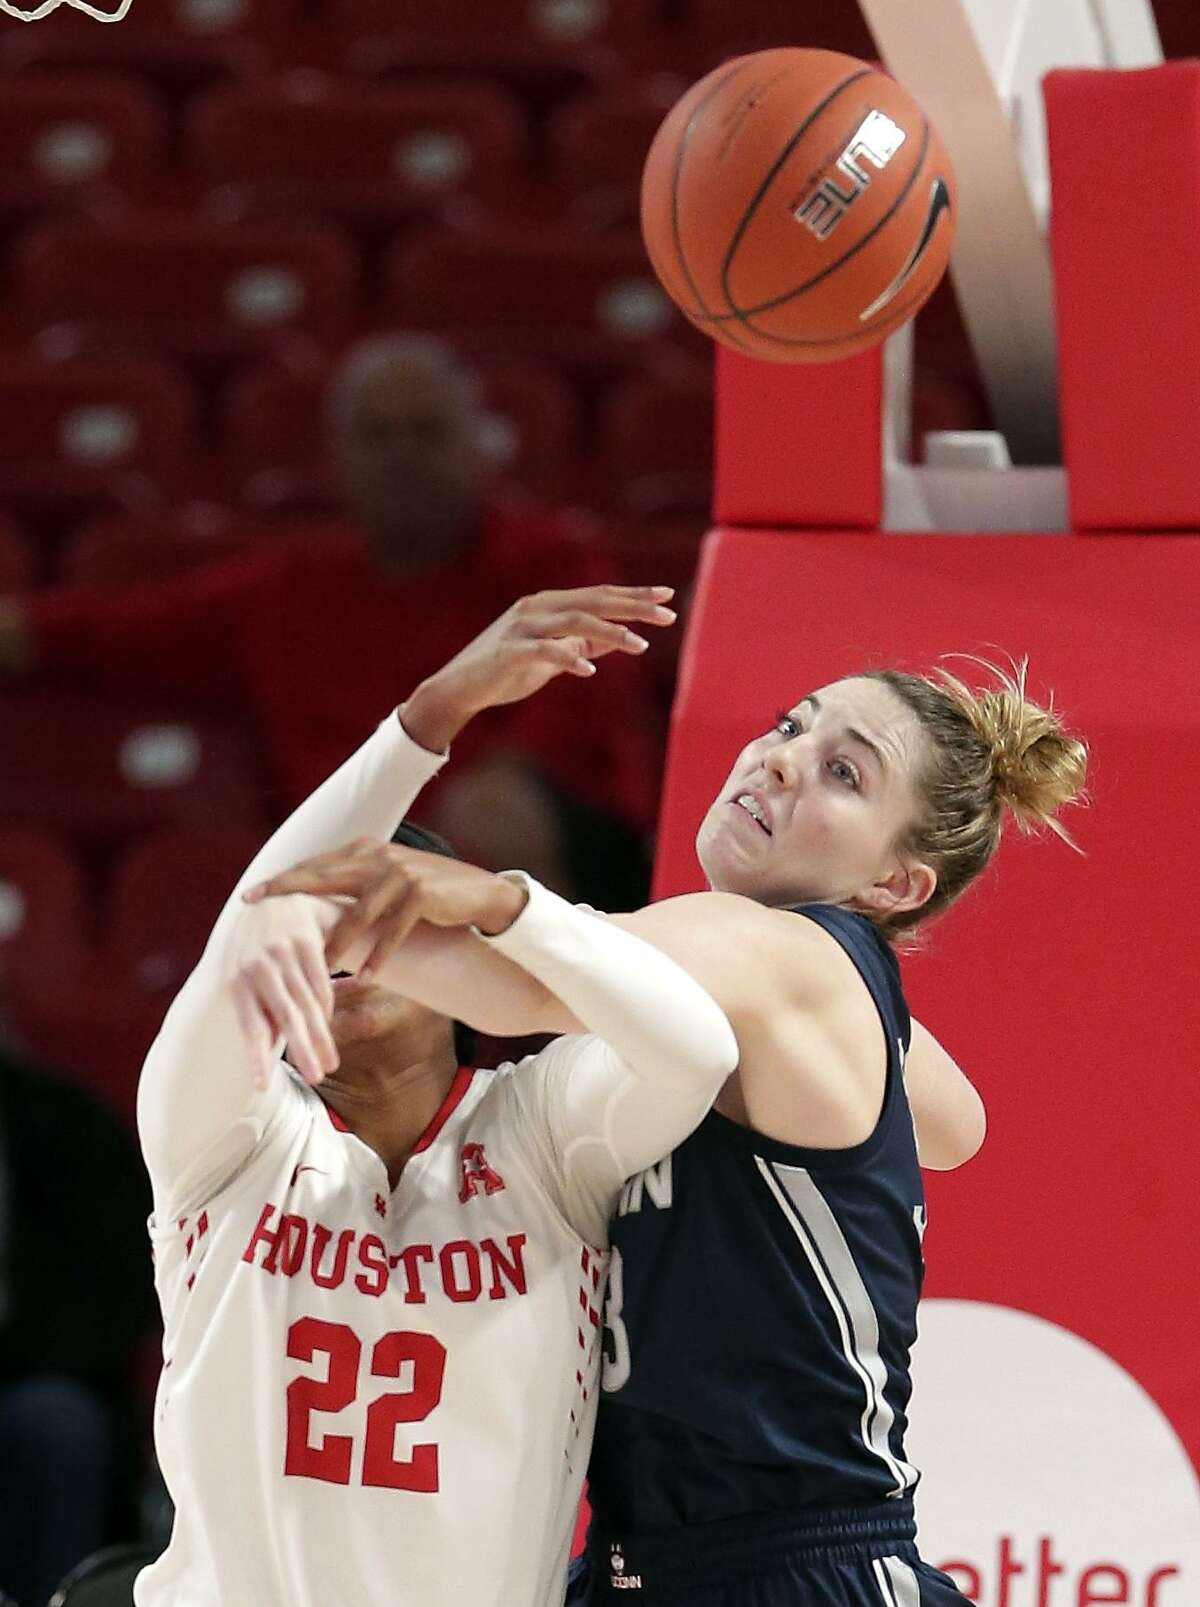 Houston forward Myyah West has her shot attempt knocked away by UConn’s Katie Lou Samuelson during the first half on Jan. 6.